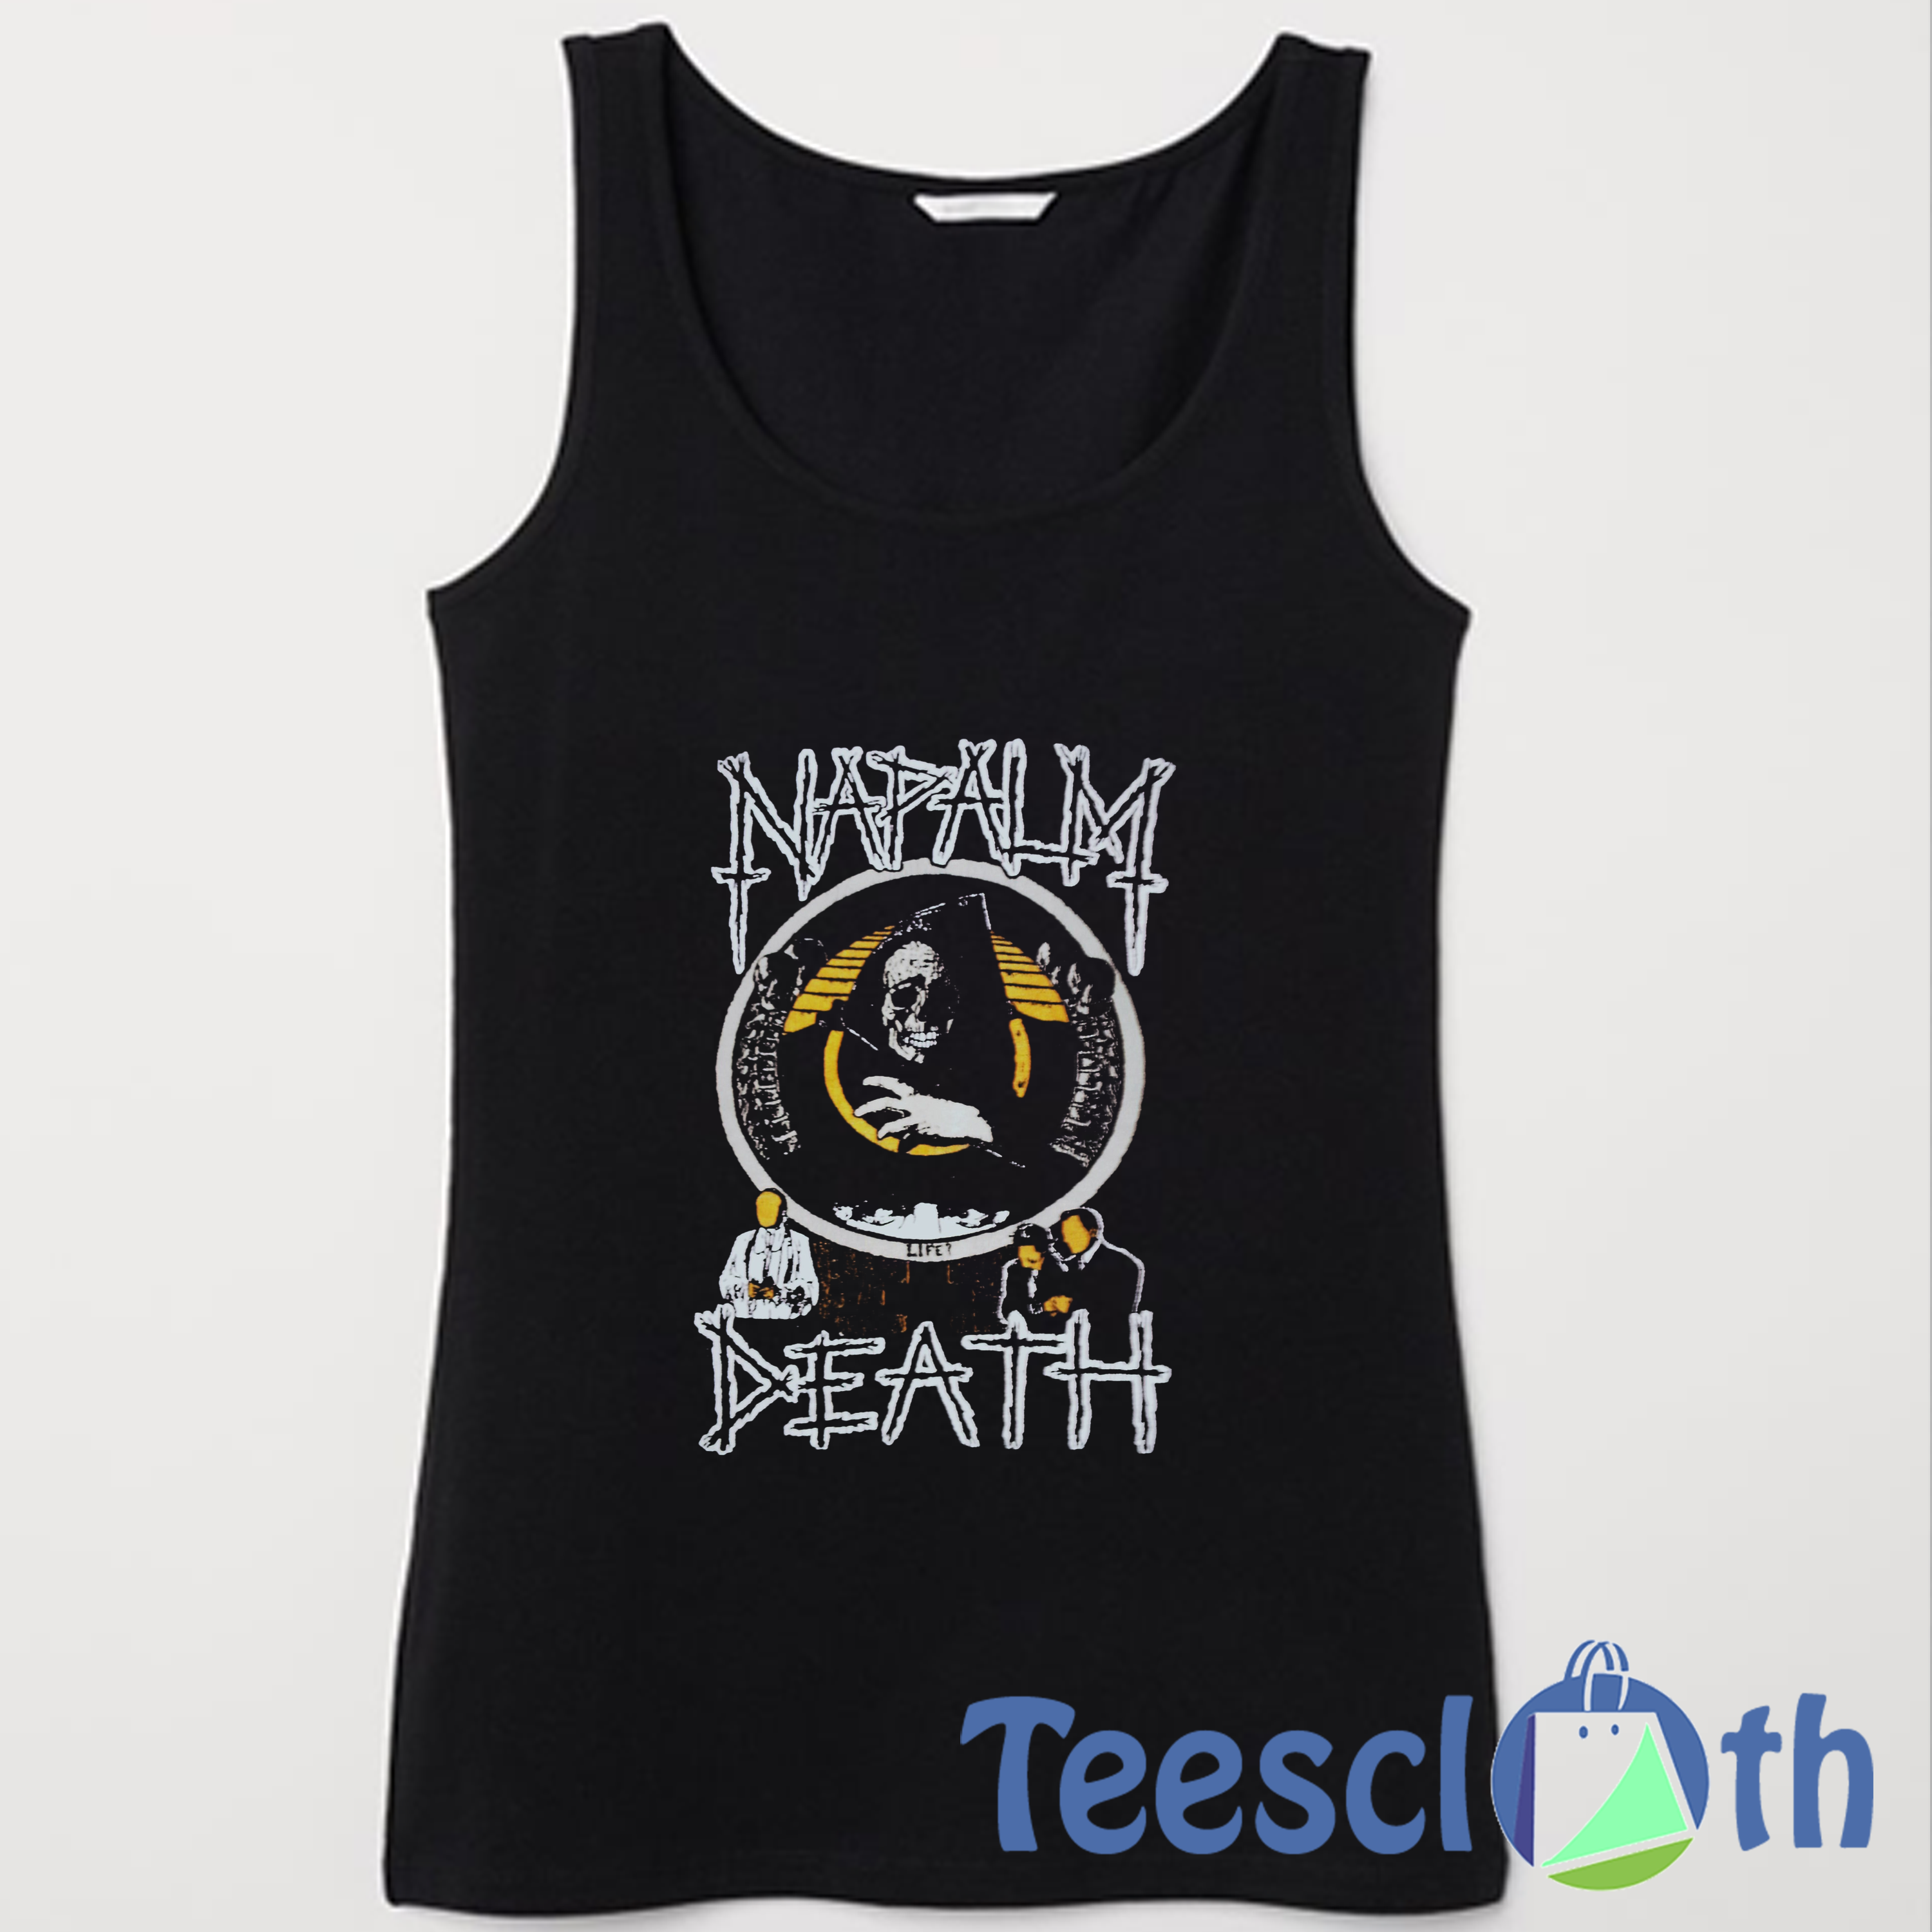 Napalm Death Tank Top Men And Women Size S to 3XL